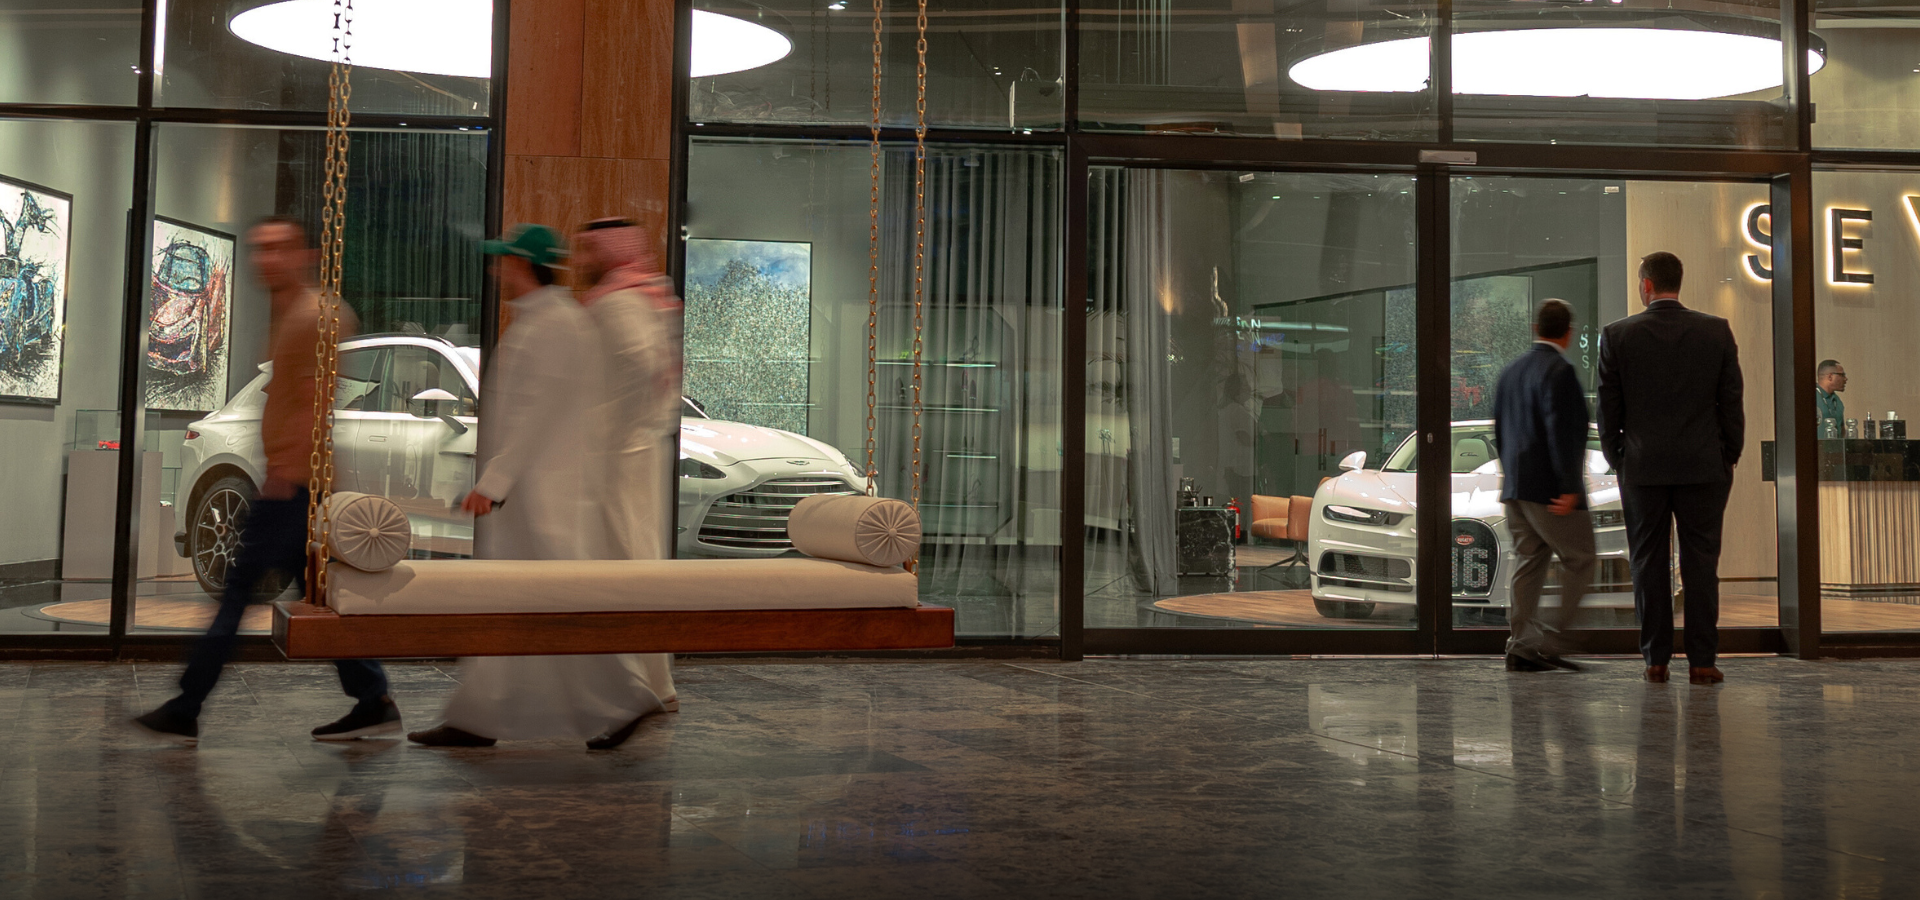 The Start of a New Era in the Saudi Automotive Market